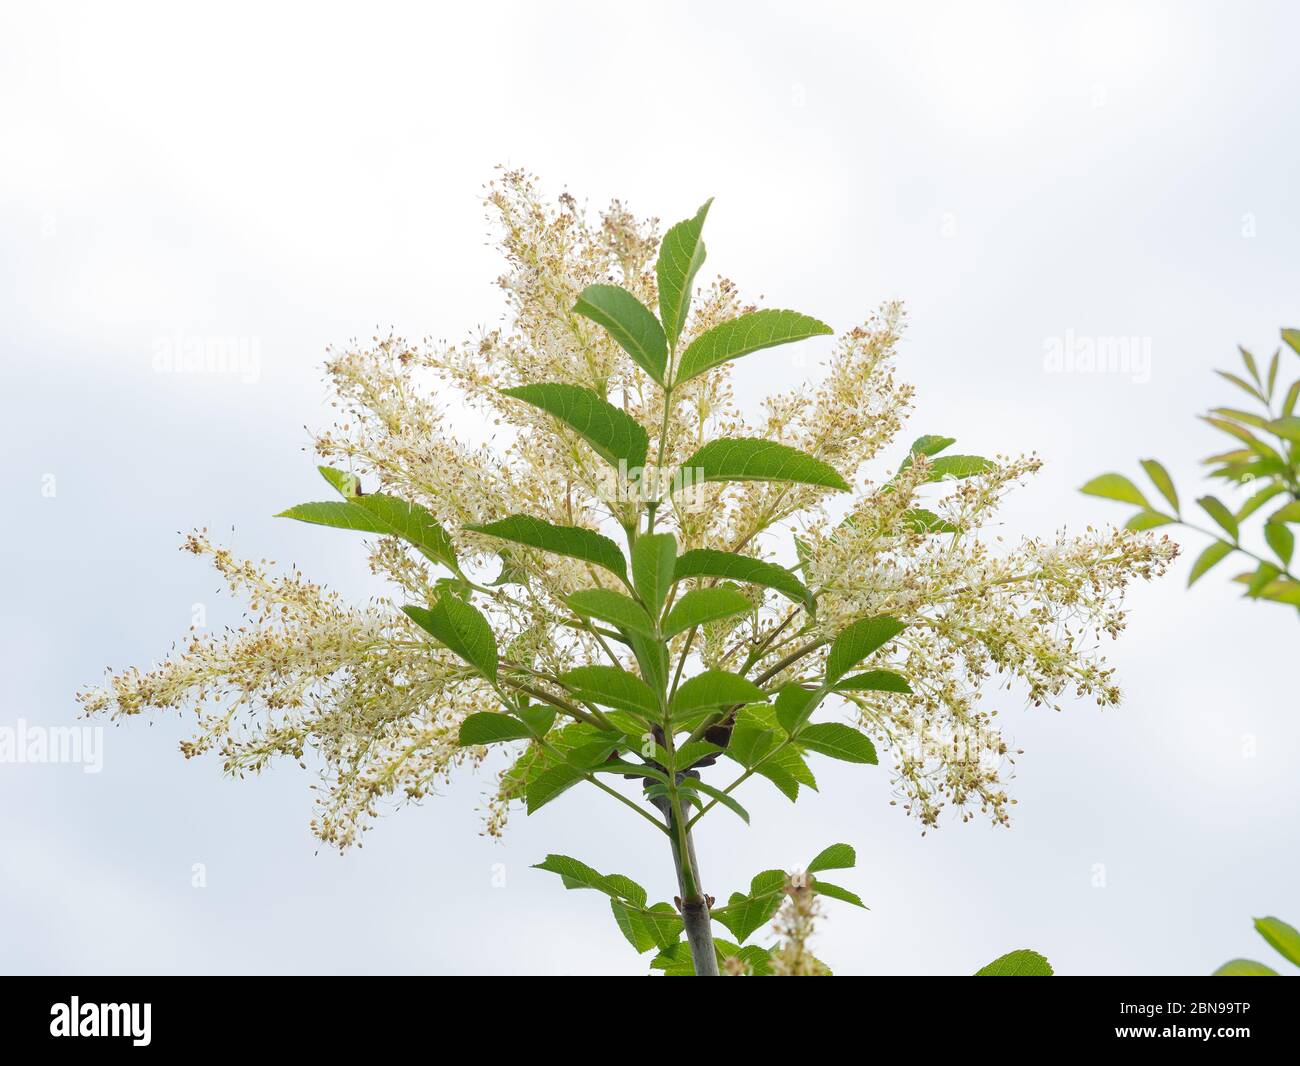 Ash branch full of flowers and new leaves . White background Stock Photo